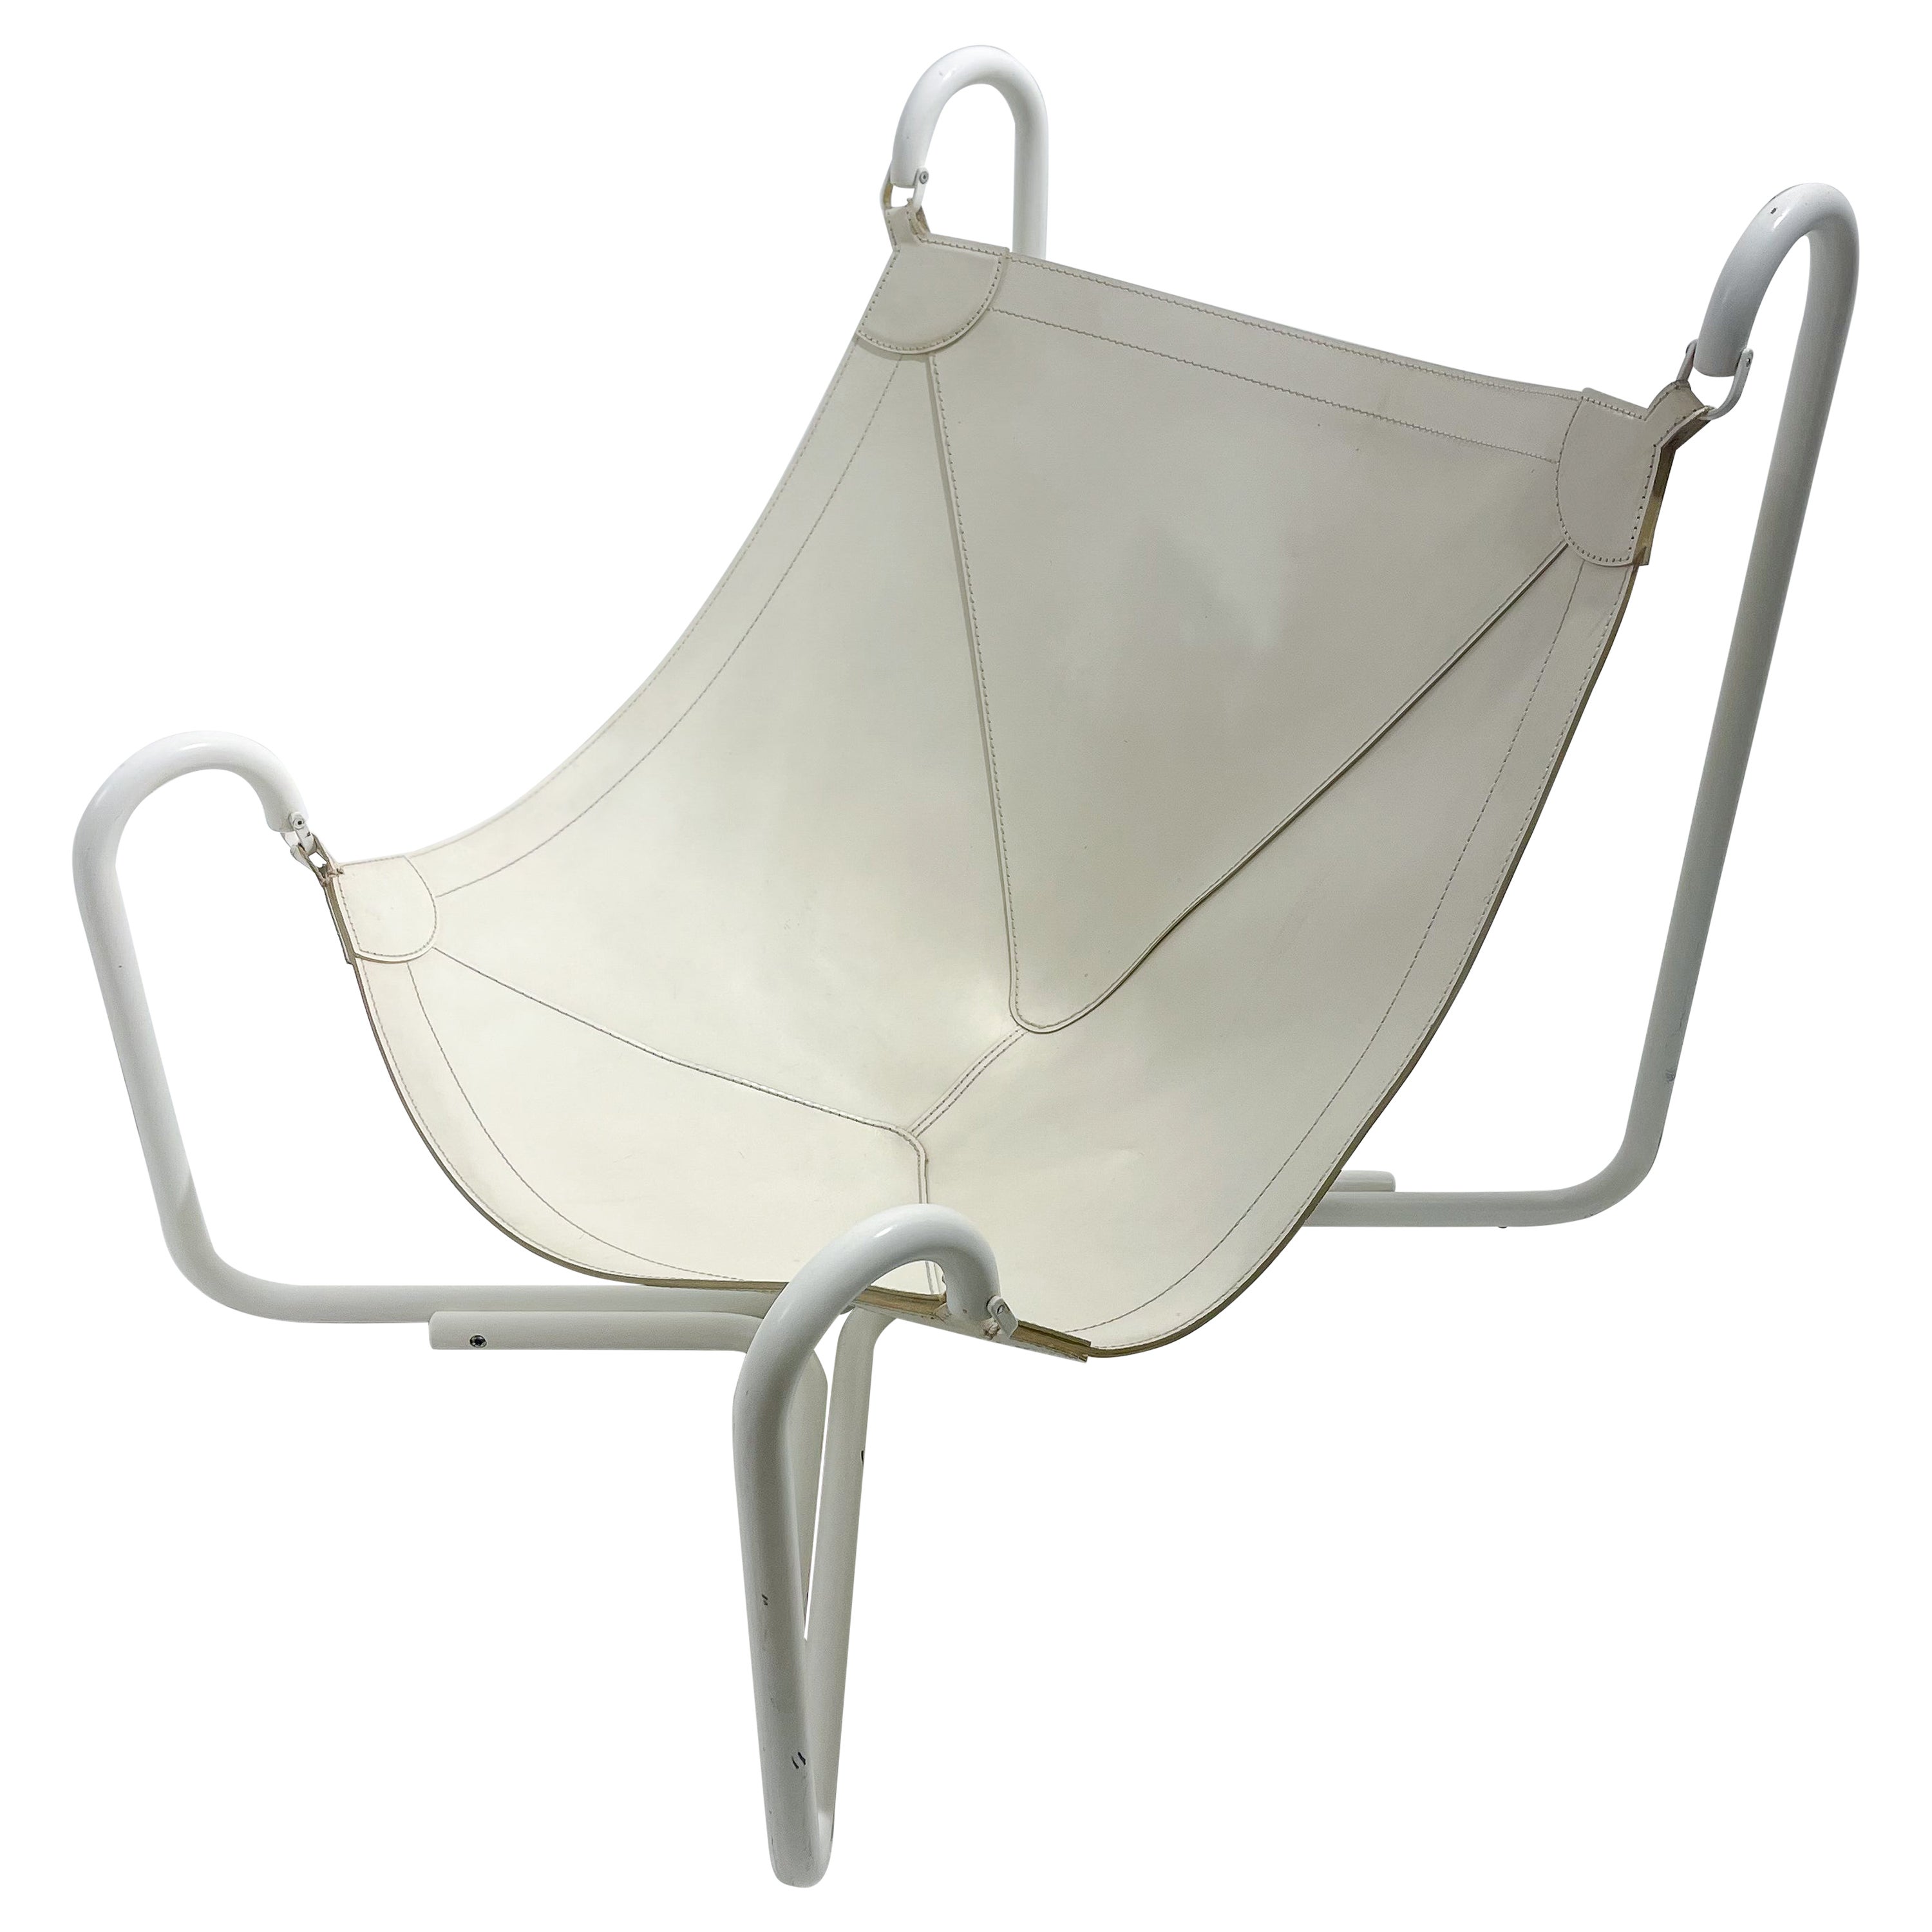 "Baffo" Lounge Chair by Gianni Pareschi and Ezio Didone for Busnelli, Italy